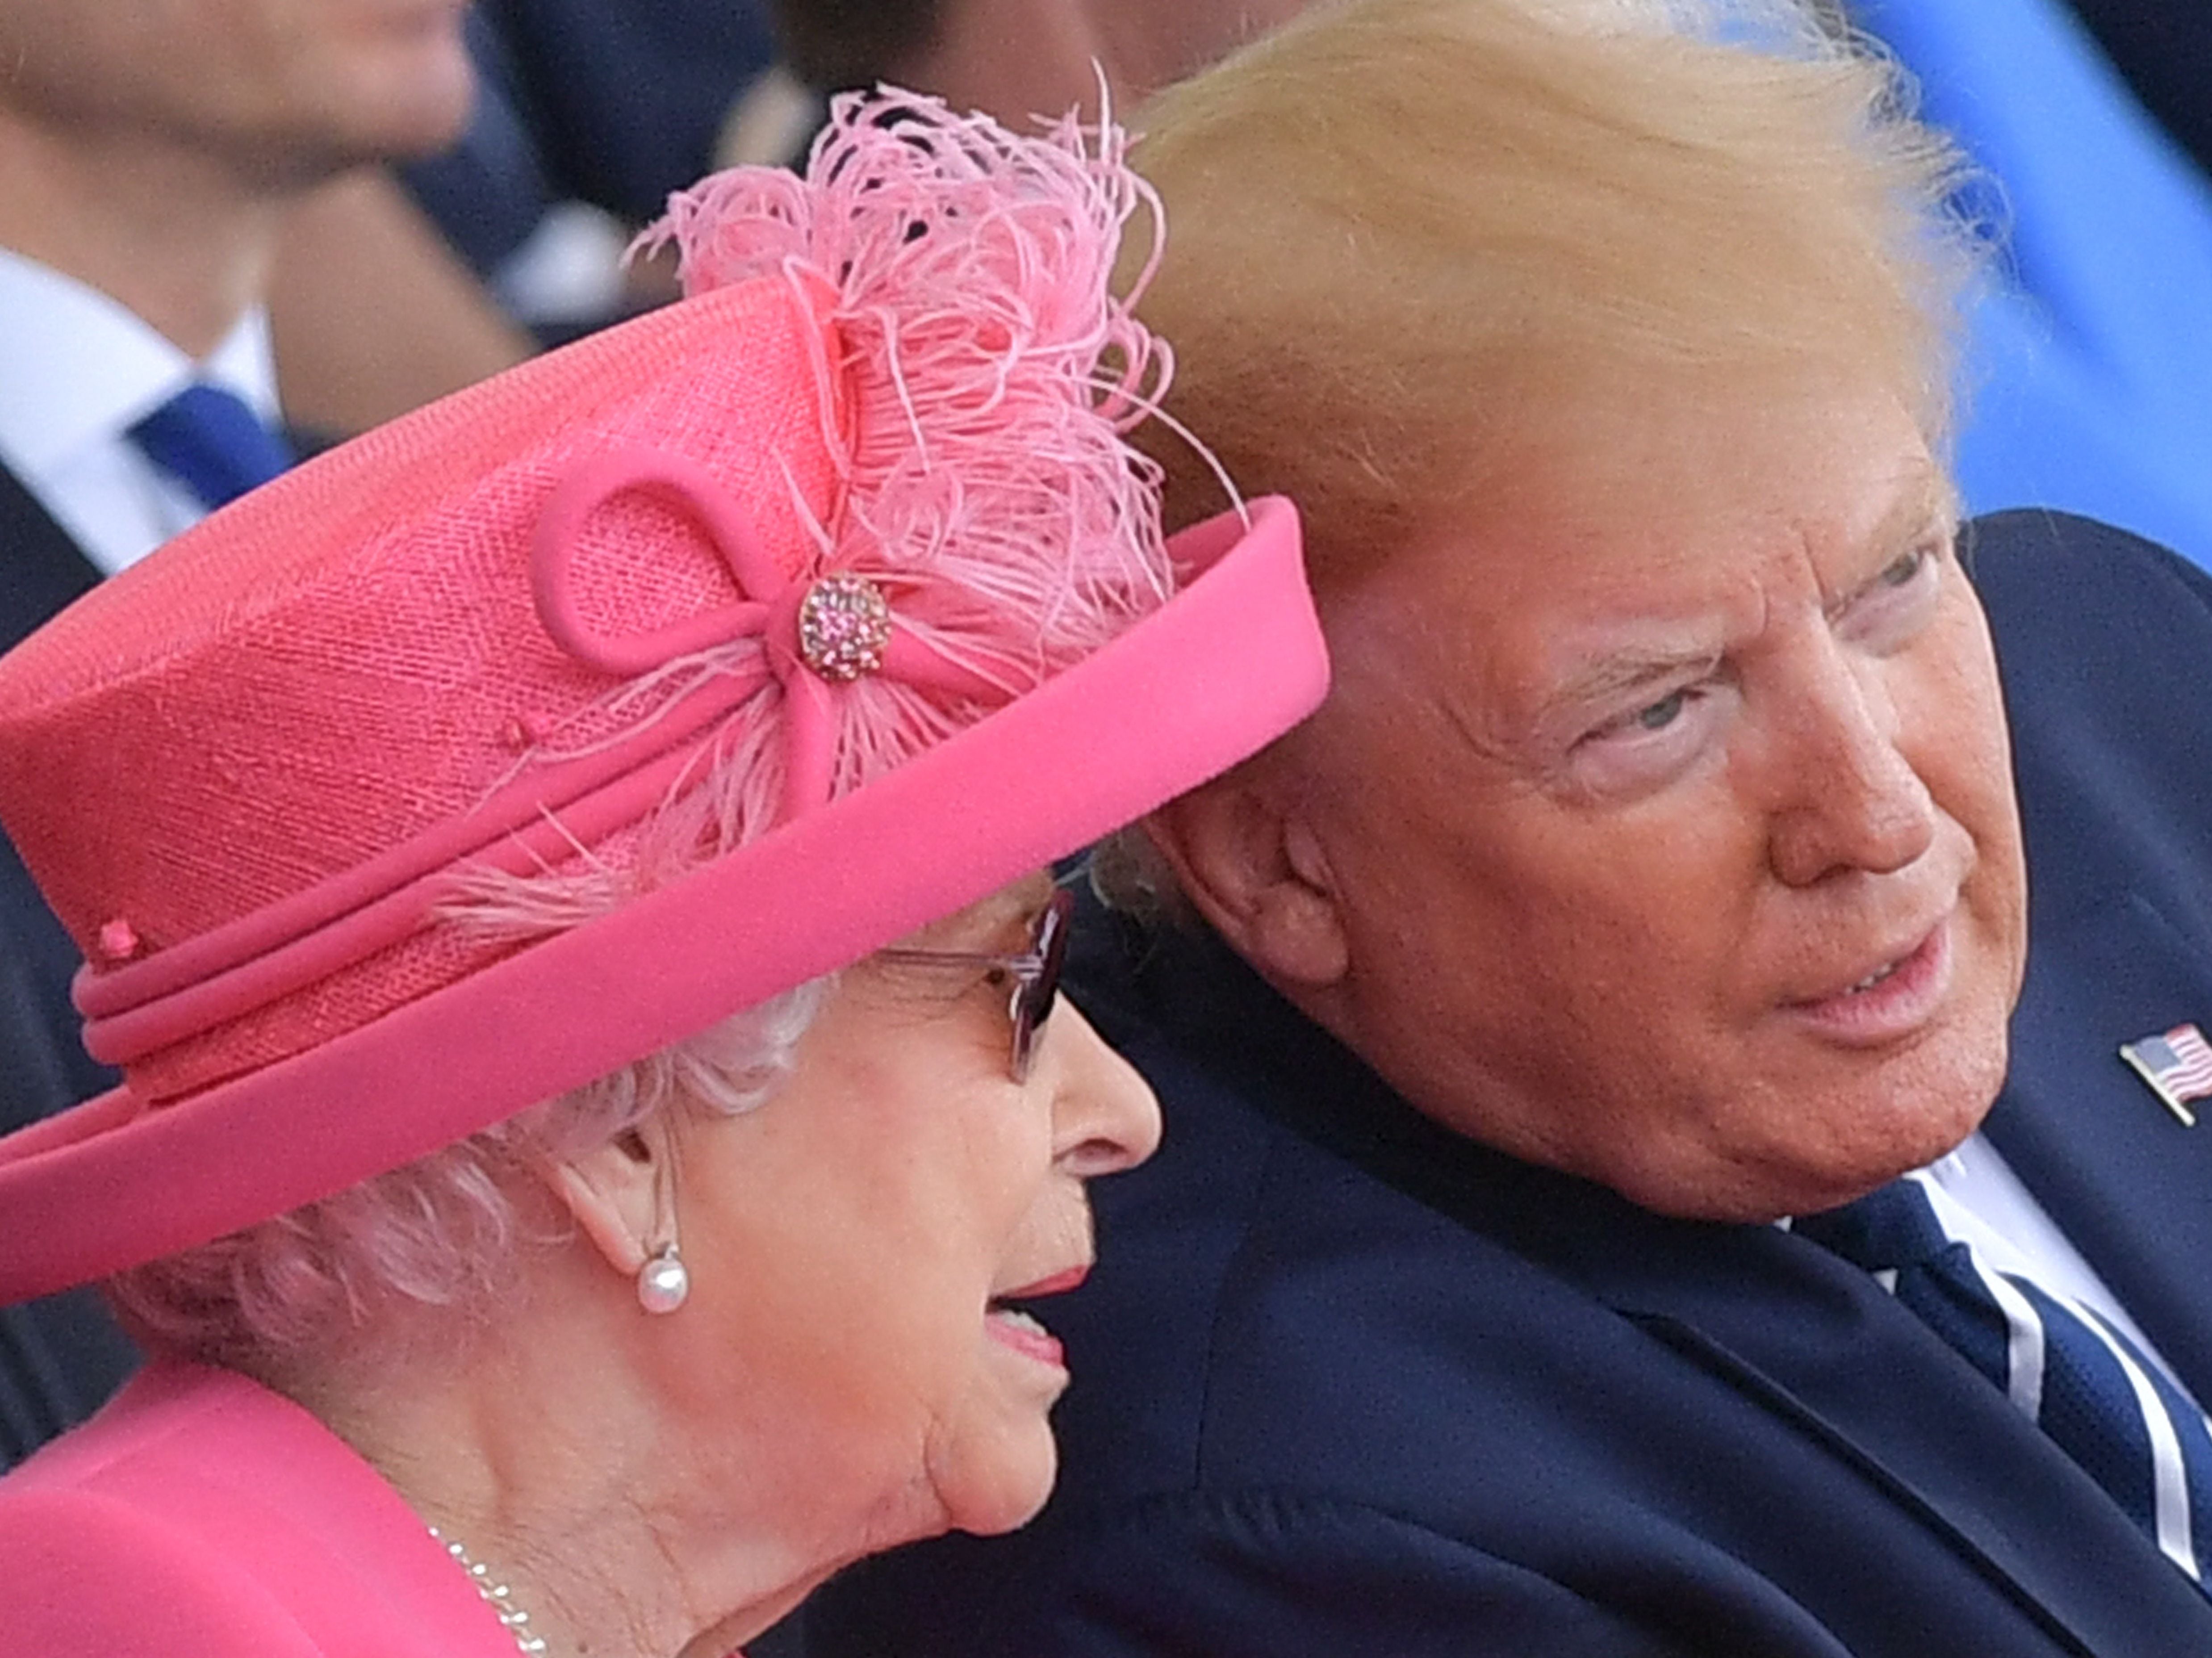 Britain's Queen Elizabeth II (L) talks with US President Donald Trump during an event to commemorate the 75th anniversary of the D-Day landings, in Portsmouth, southern England, on June 5, 2019